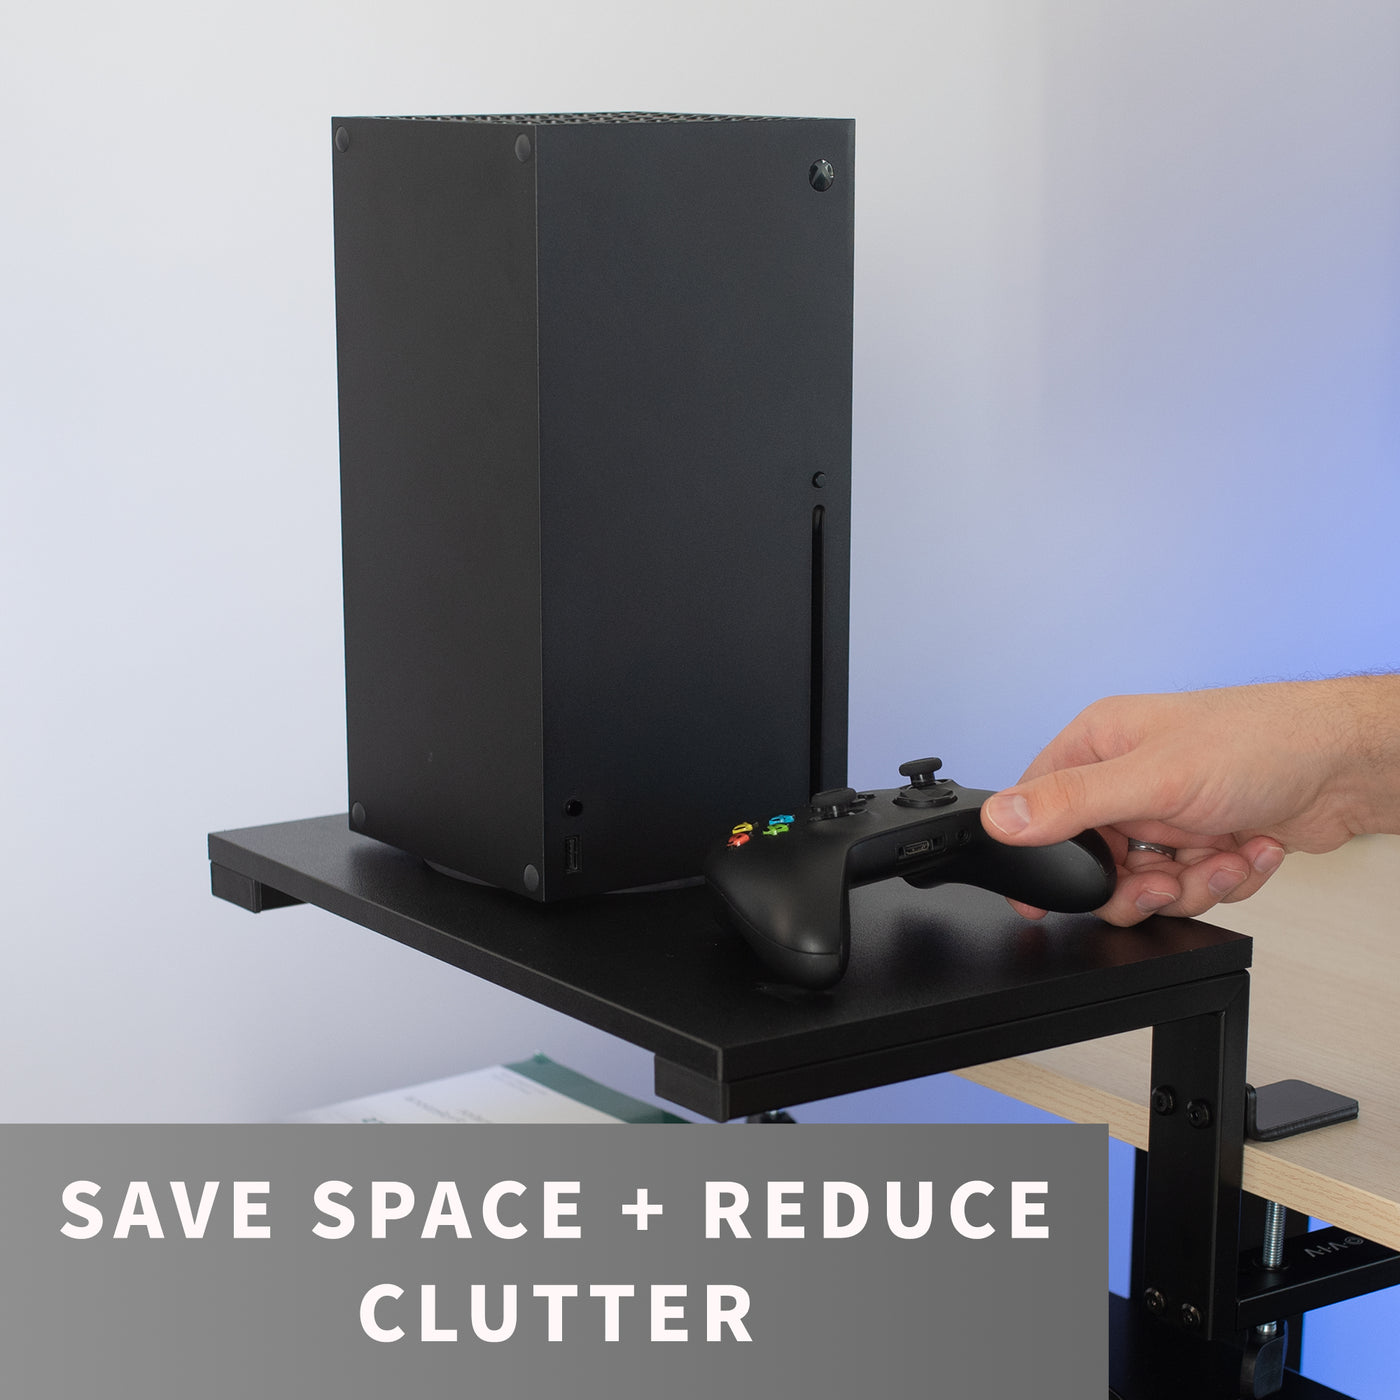 Maximize space and reduce clutter with a desk extension shelf.